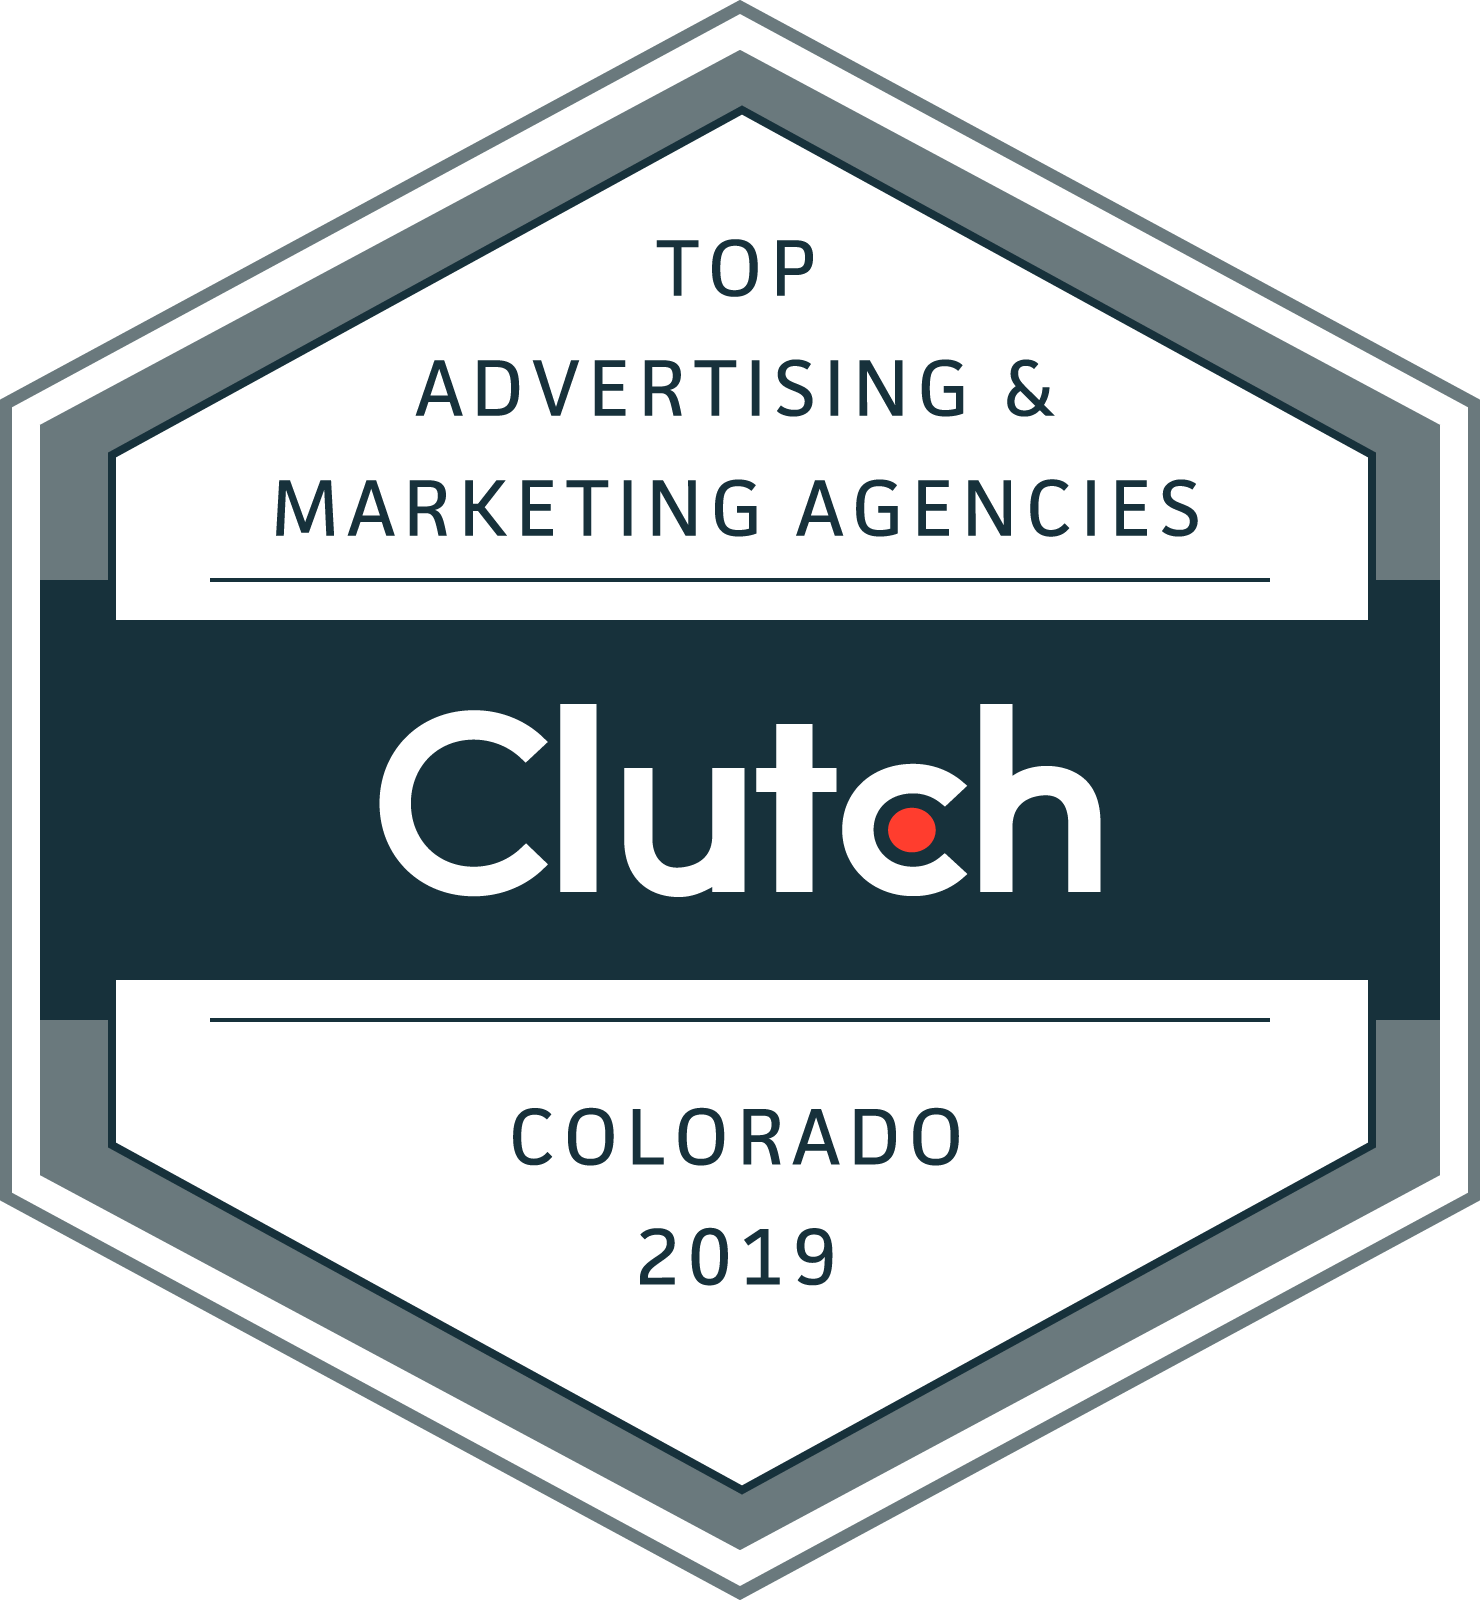 Clutch.co Awards Analytive with Top B2B Company in Colorado for 2019